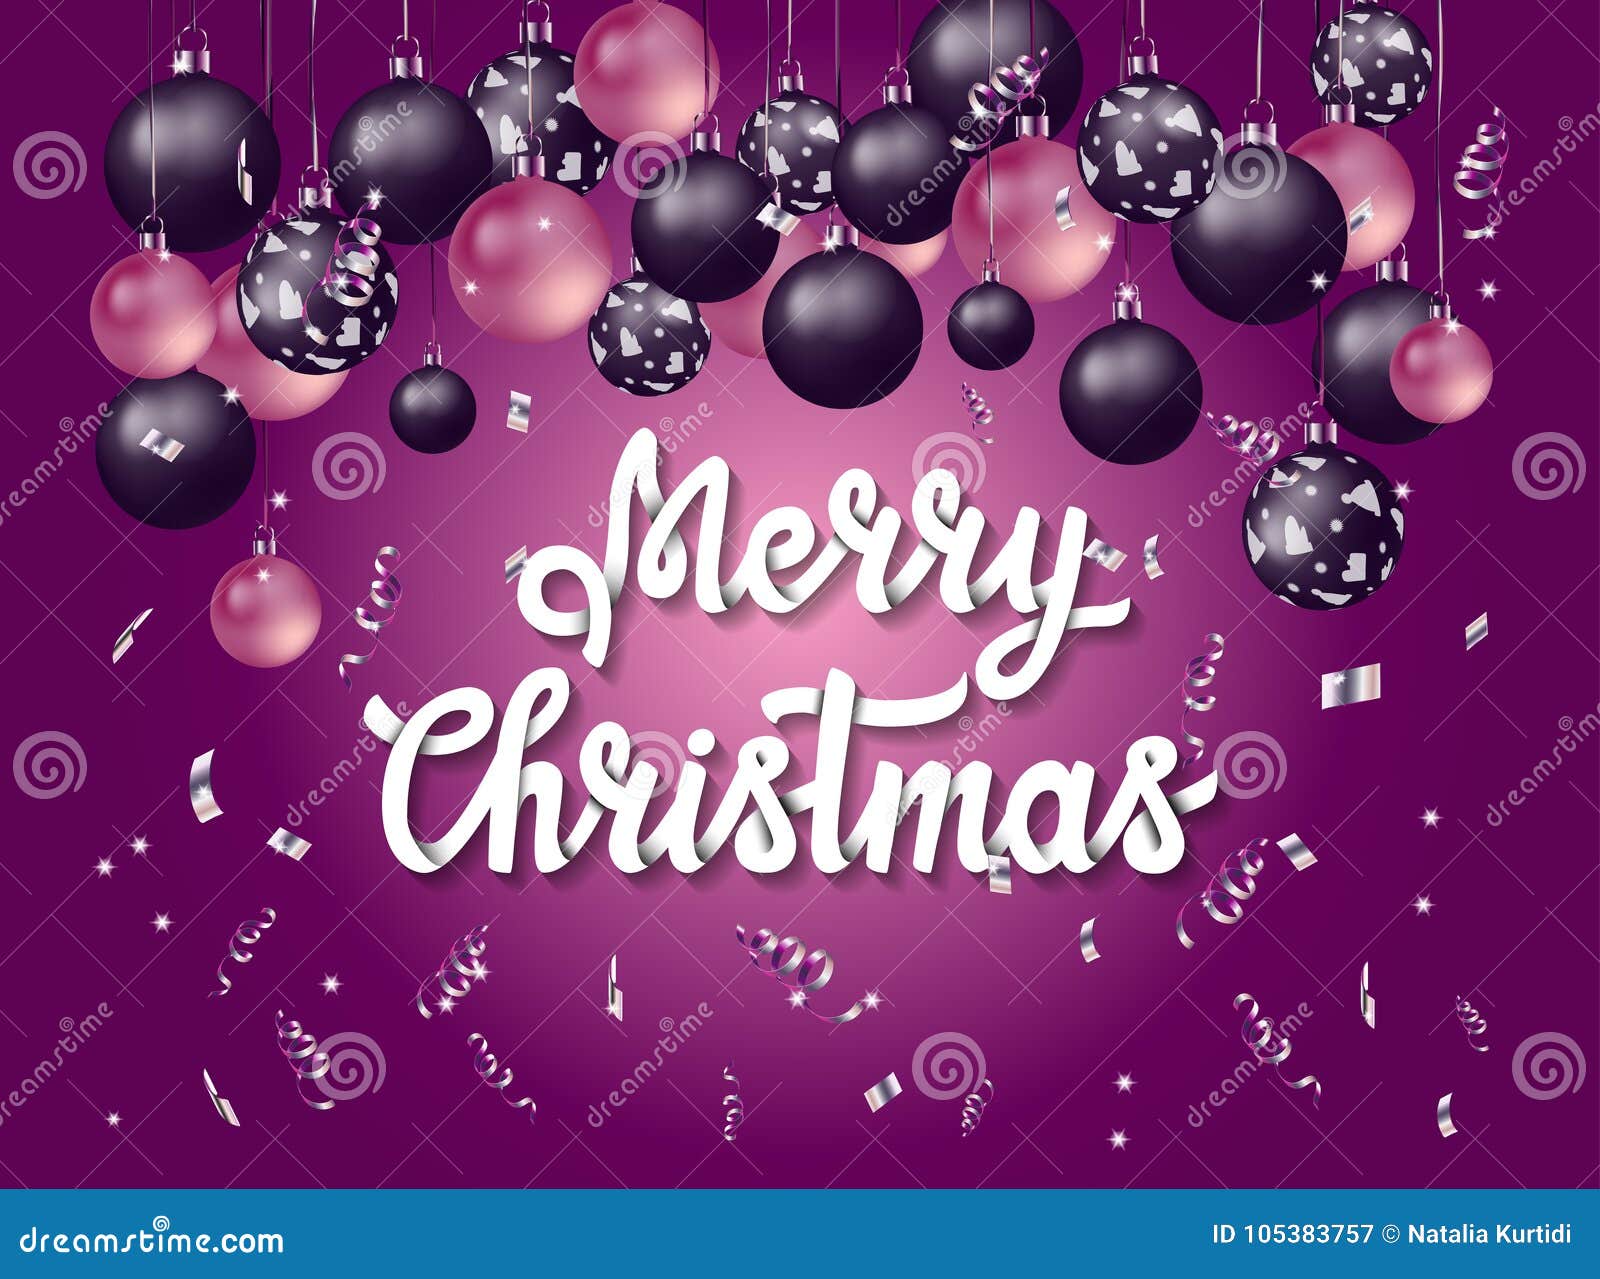 handlettering merry christmas with purple background